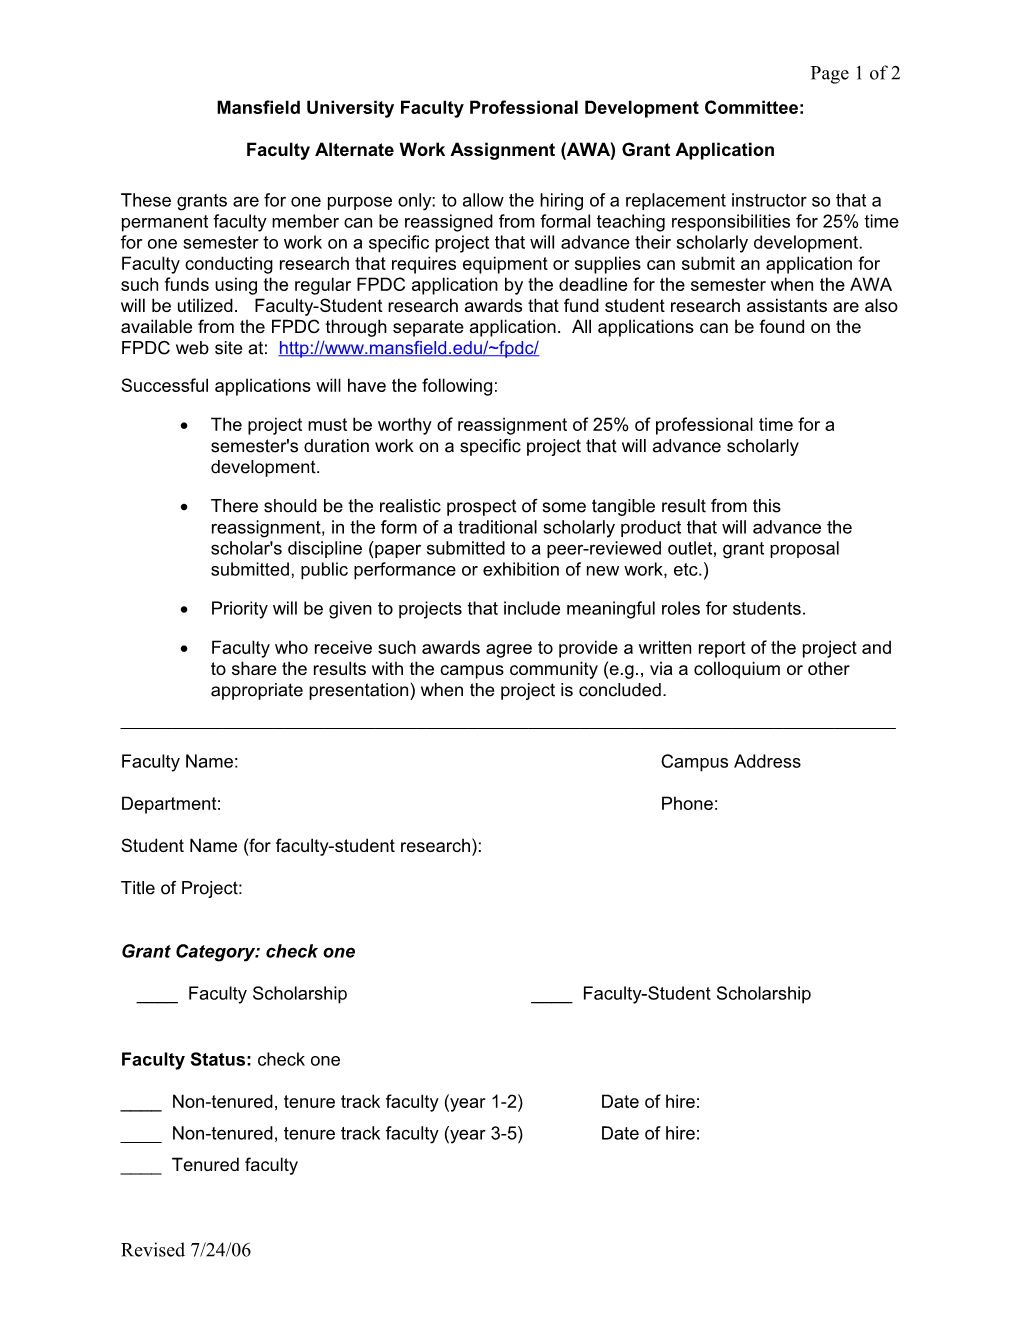 Application for Mansfield University Faculty Professional Development Committee Grants